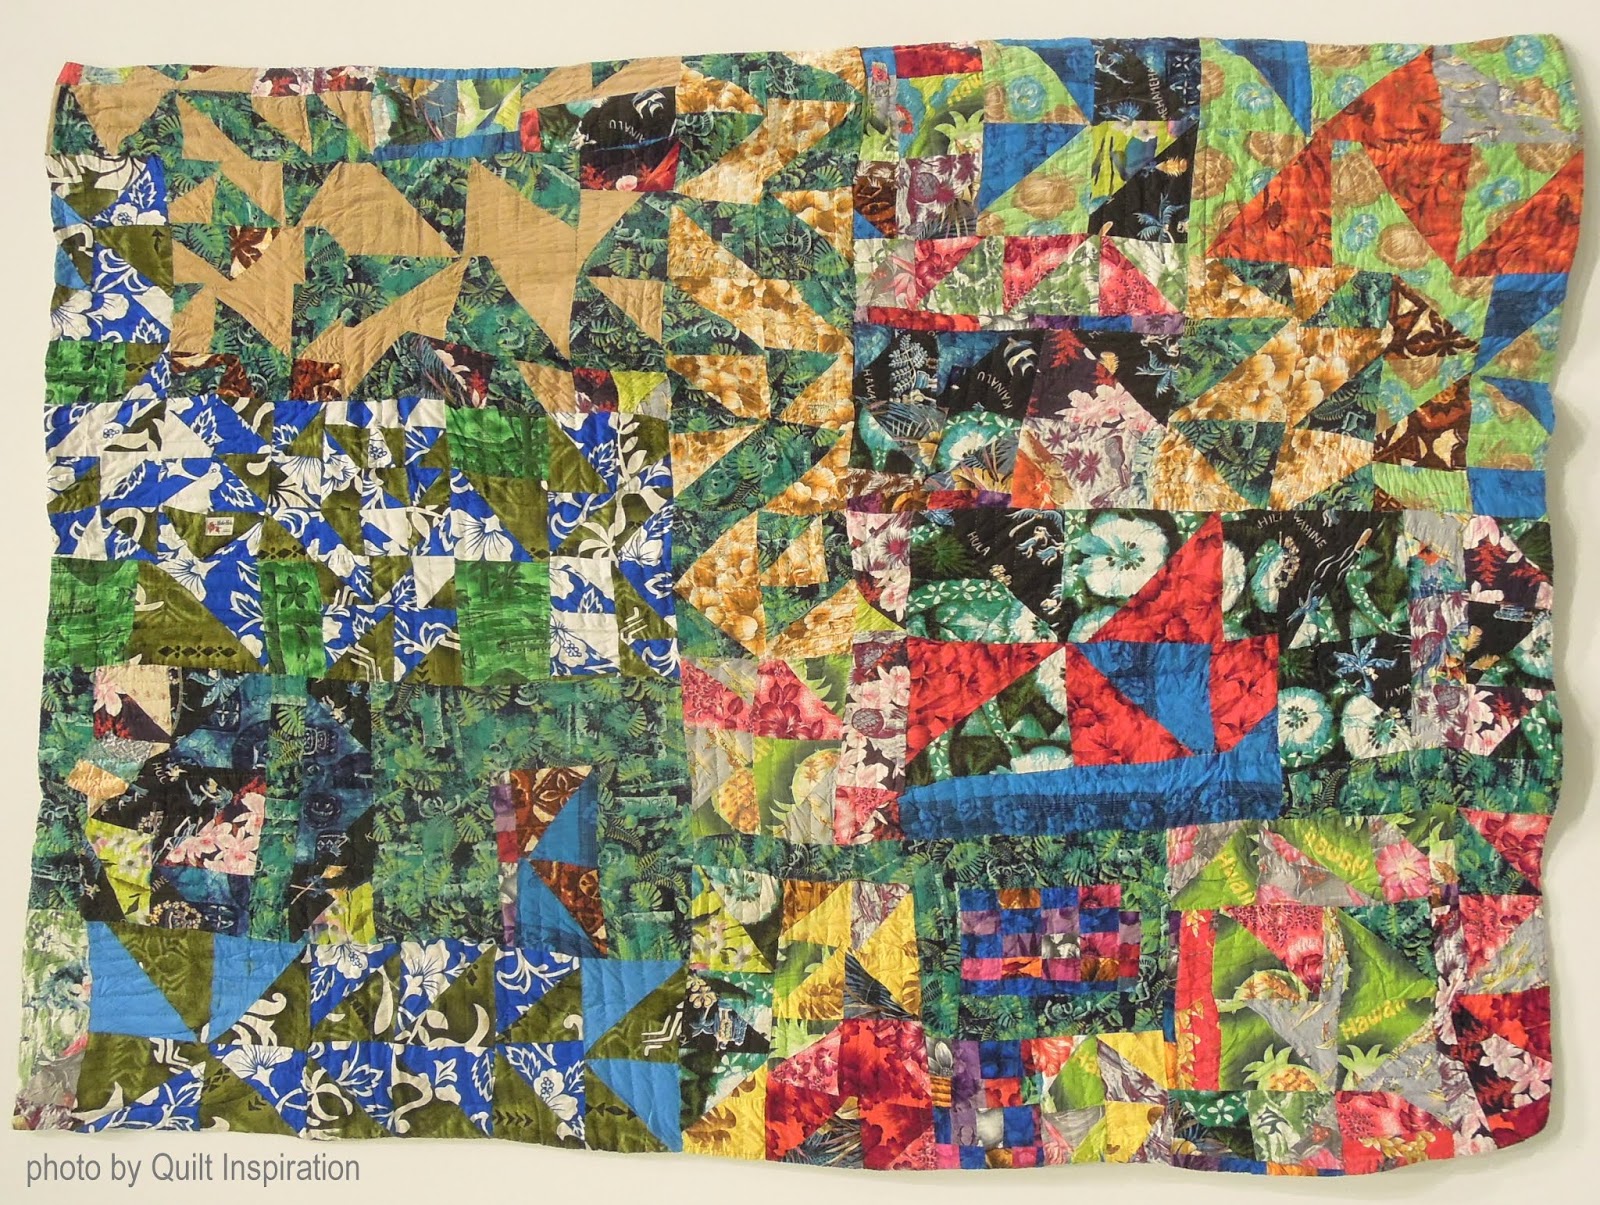 Quilt Inspiration: Quilts by Rosie Lee Tompkins